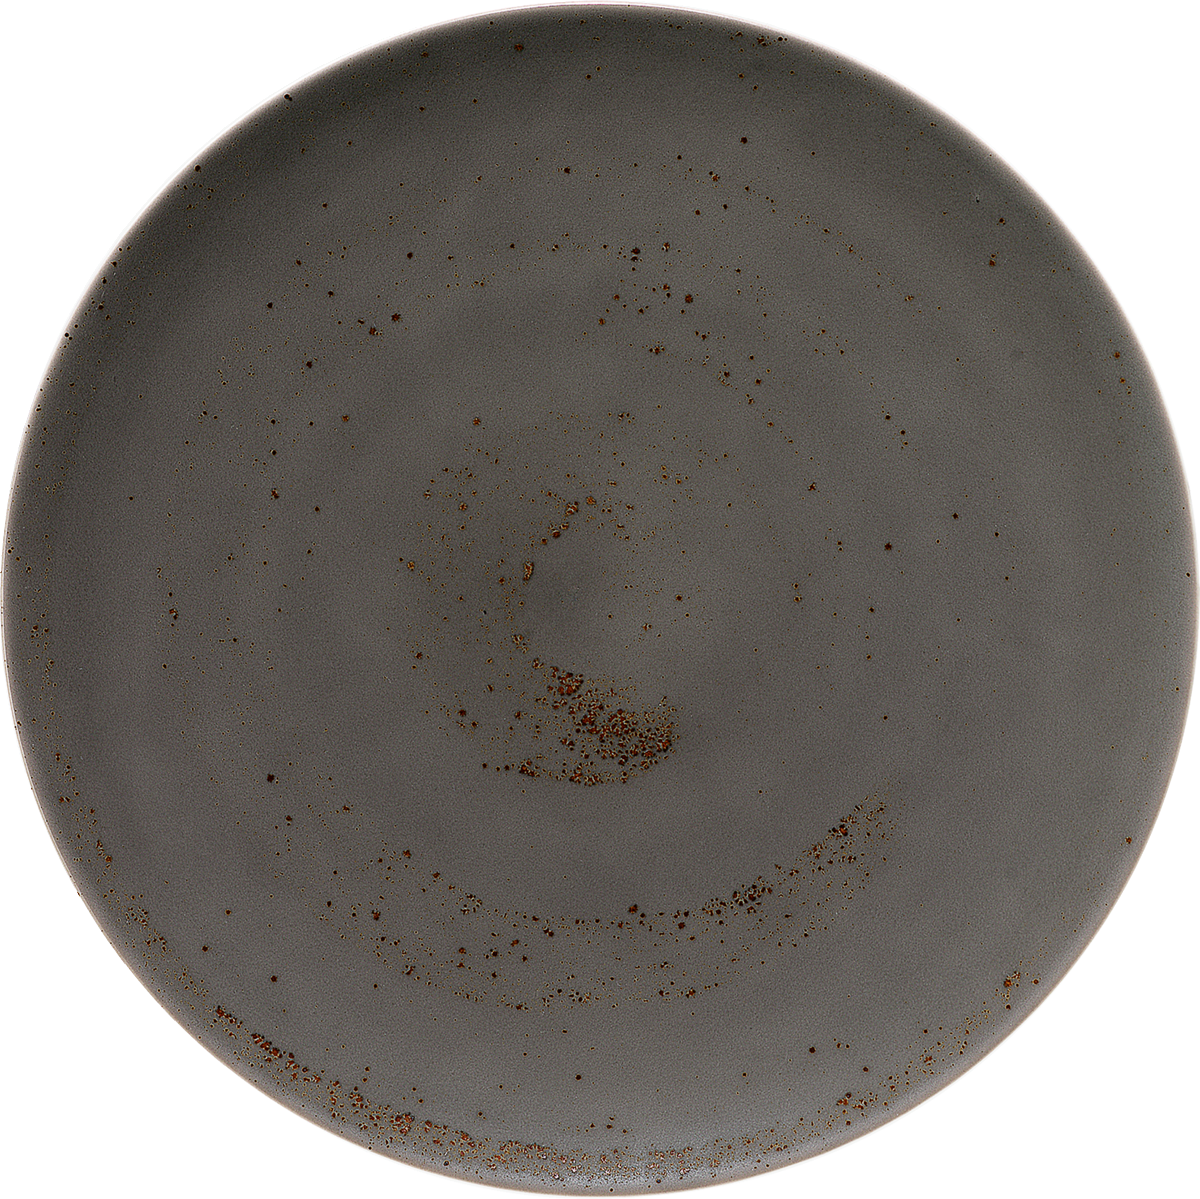 Plate flat round coupe 17cm